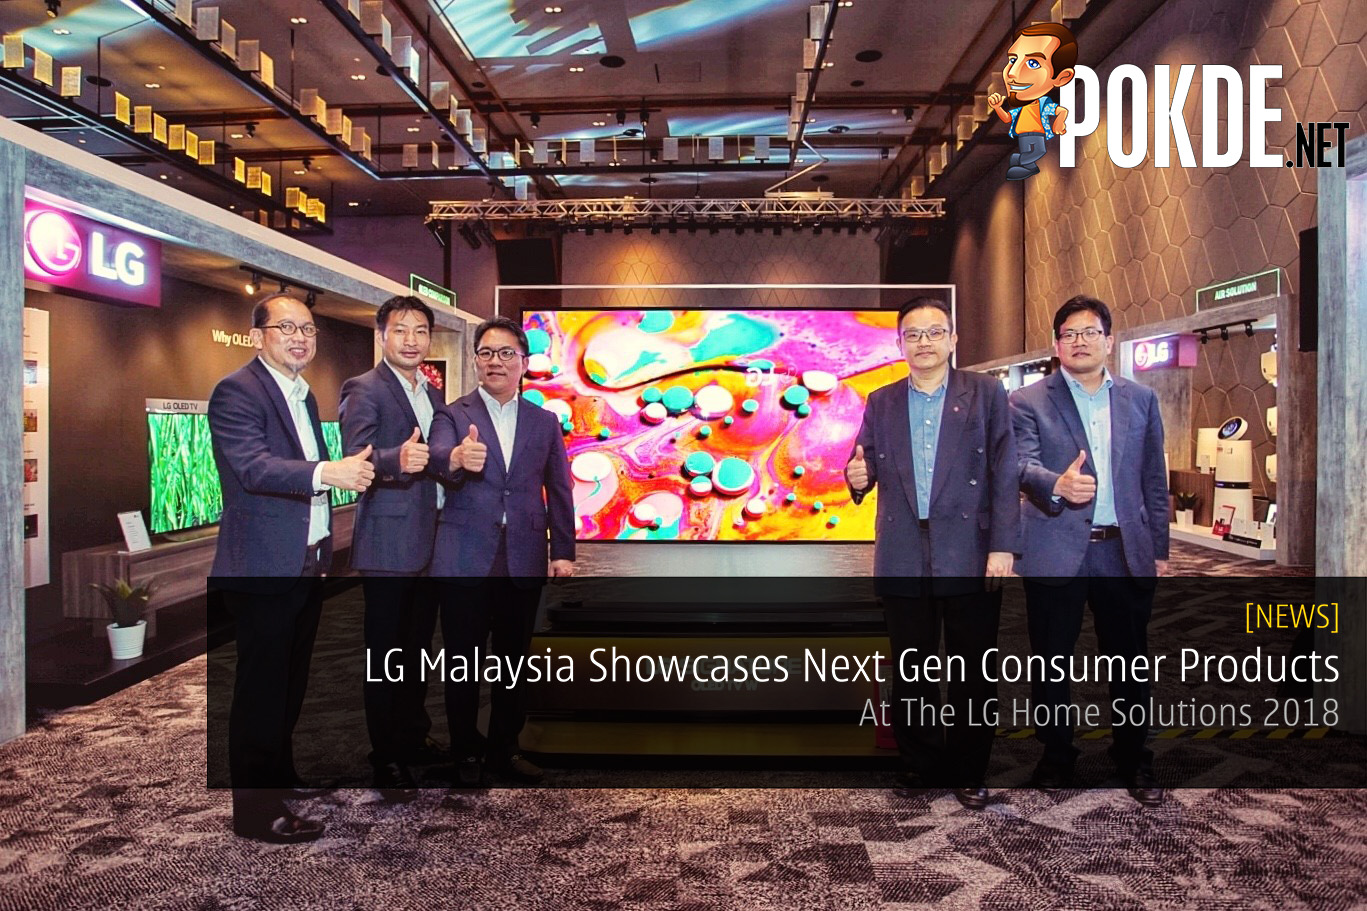 LG Malaysia Showcases Next Gen Consumer Products At The LG Home Solutions 2018 23